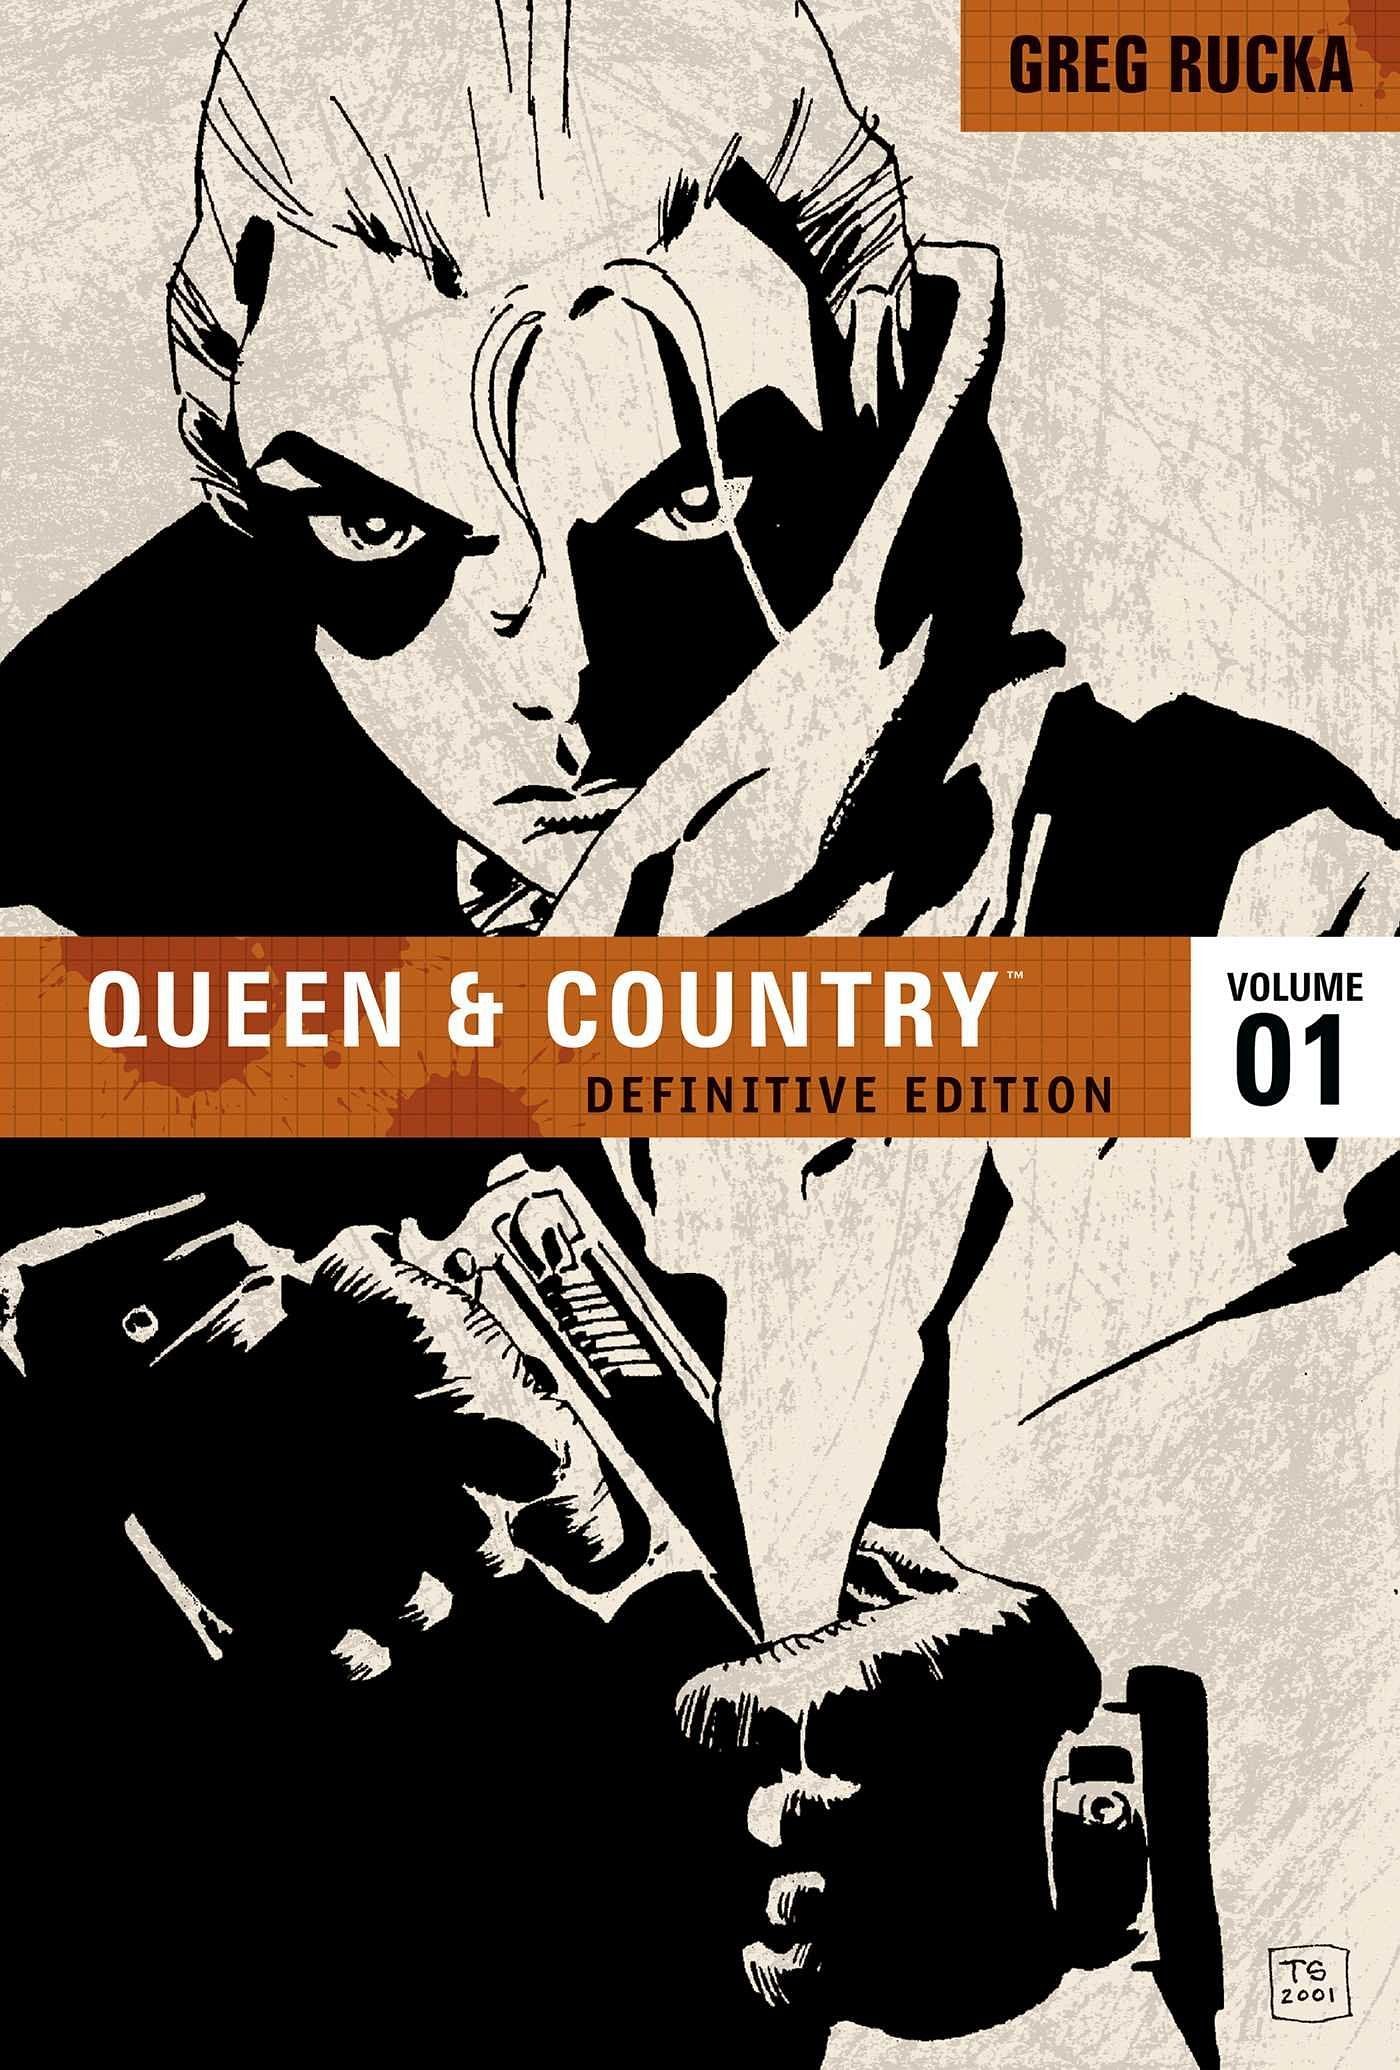 Queen and Country #1 (Image via Oni Press)